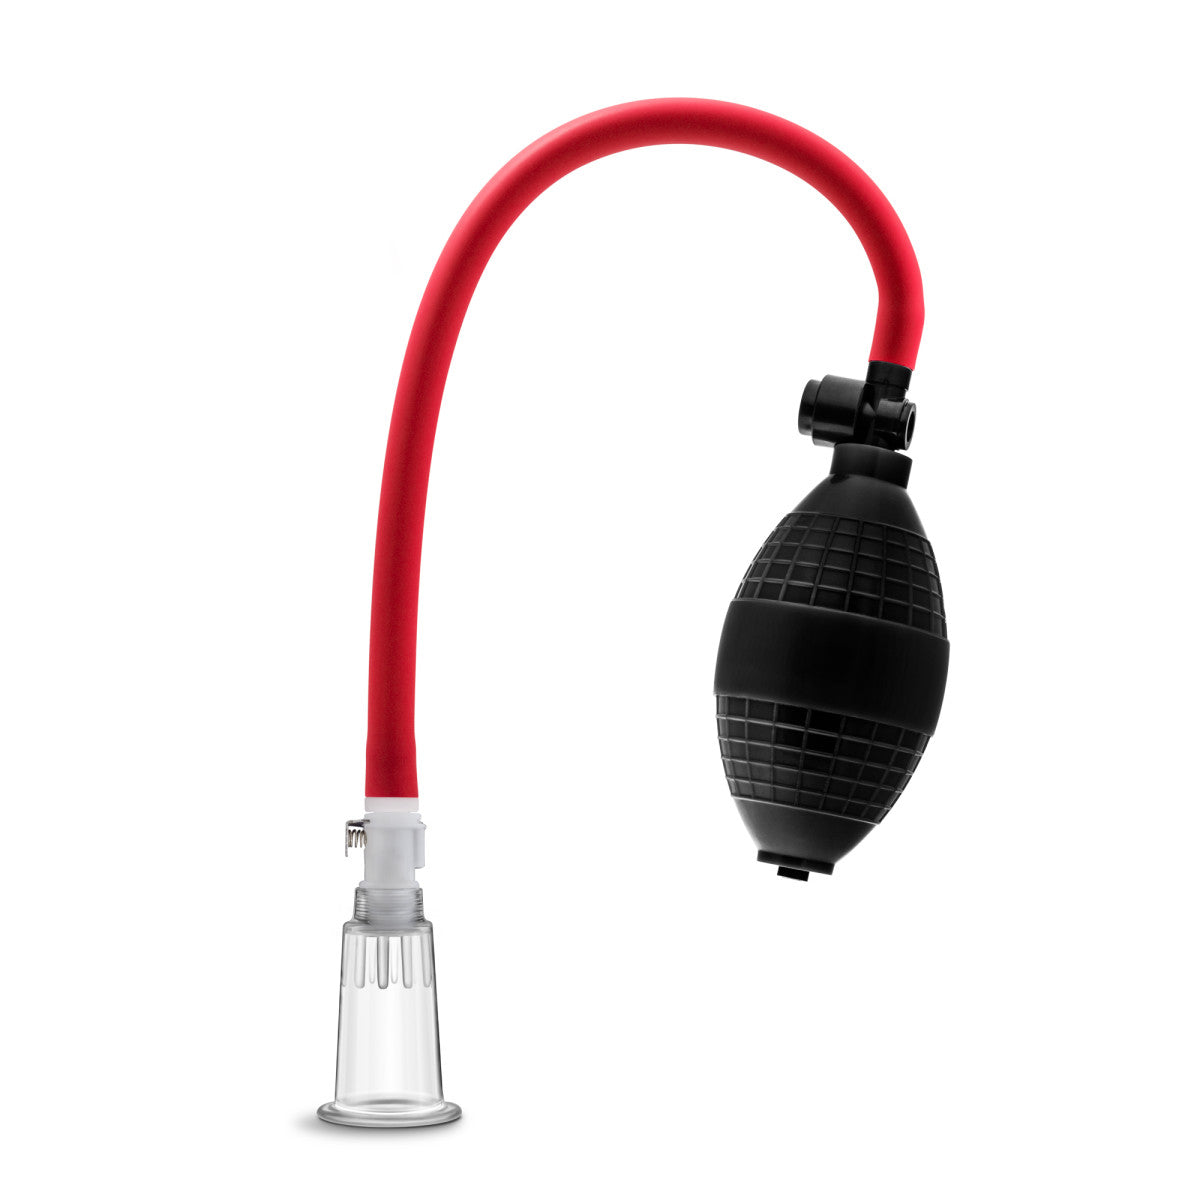 Clear cylinder with safety release valve connected to black squeezable ball pump by red silicone hose.  Additional images show alternate angles.